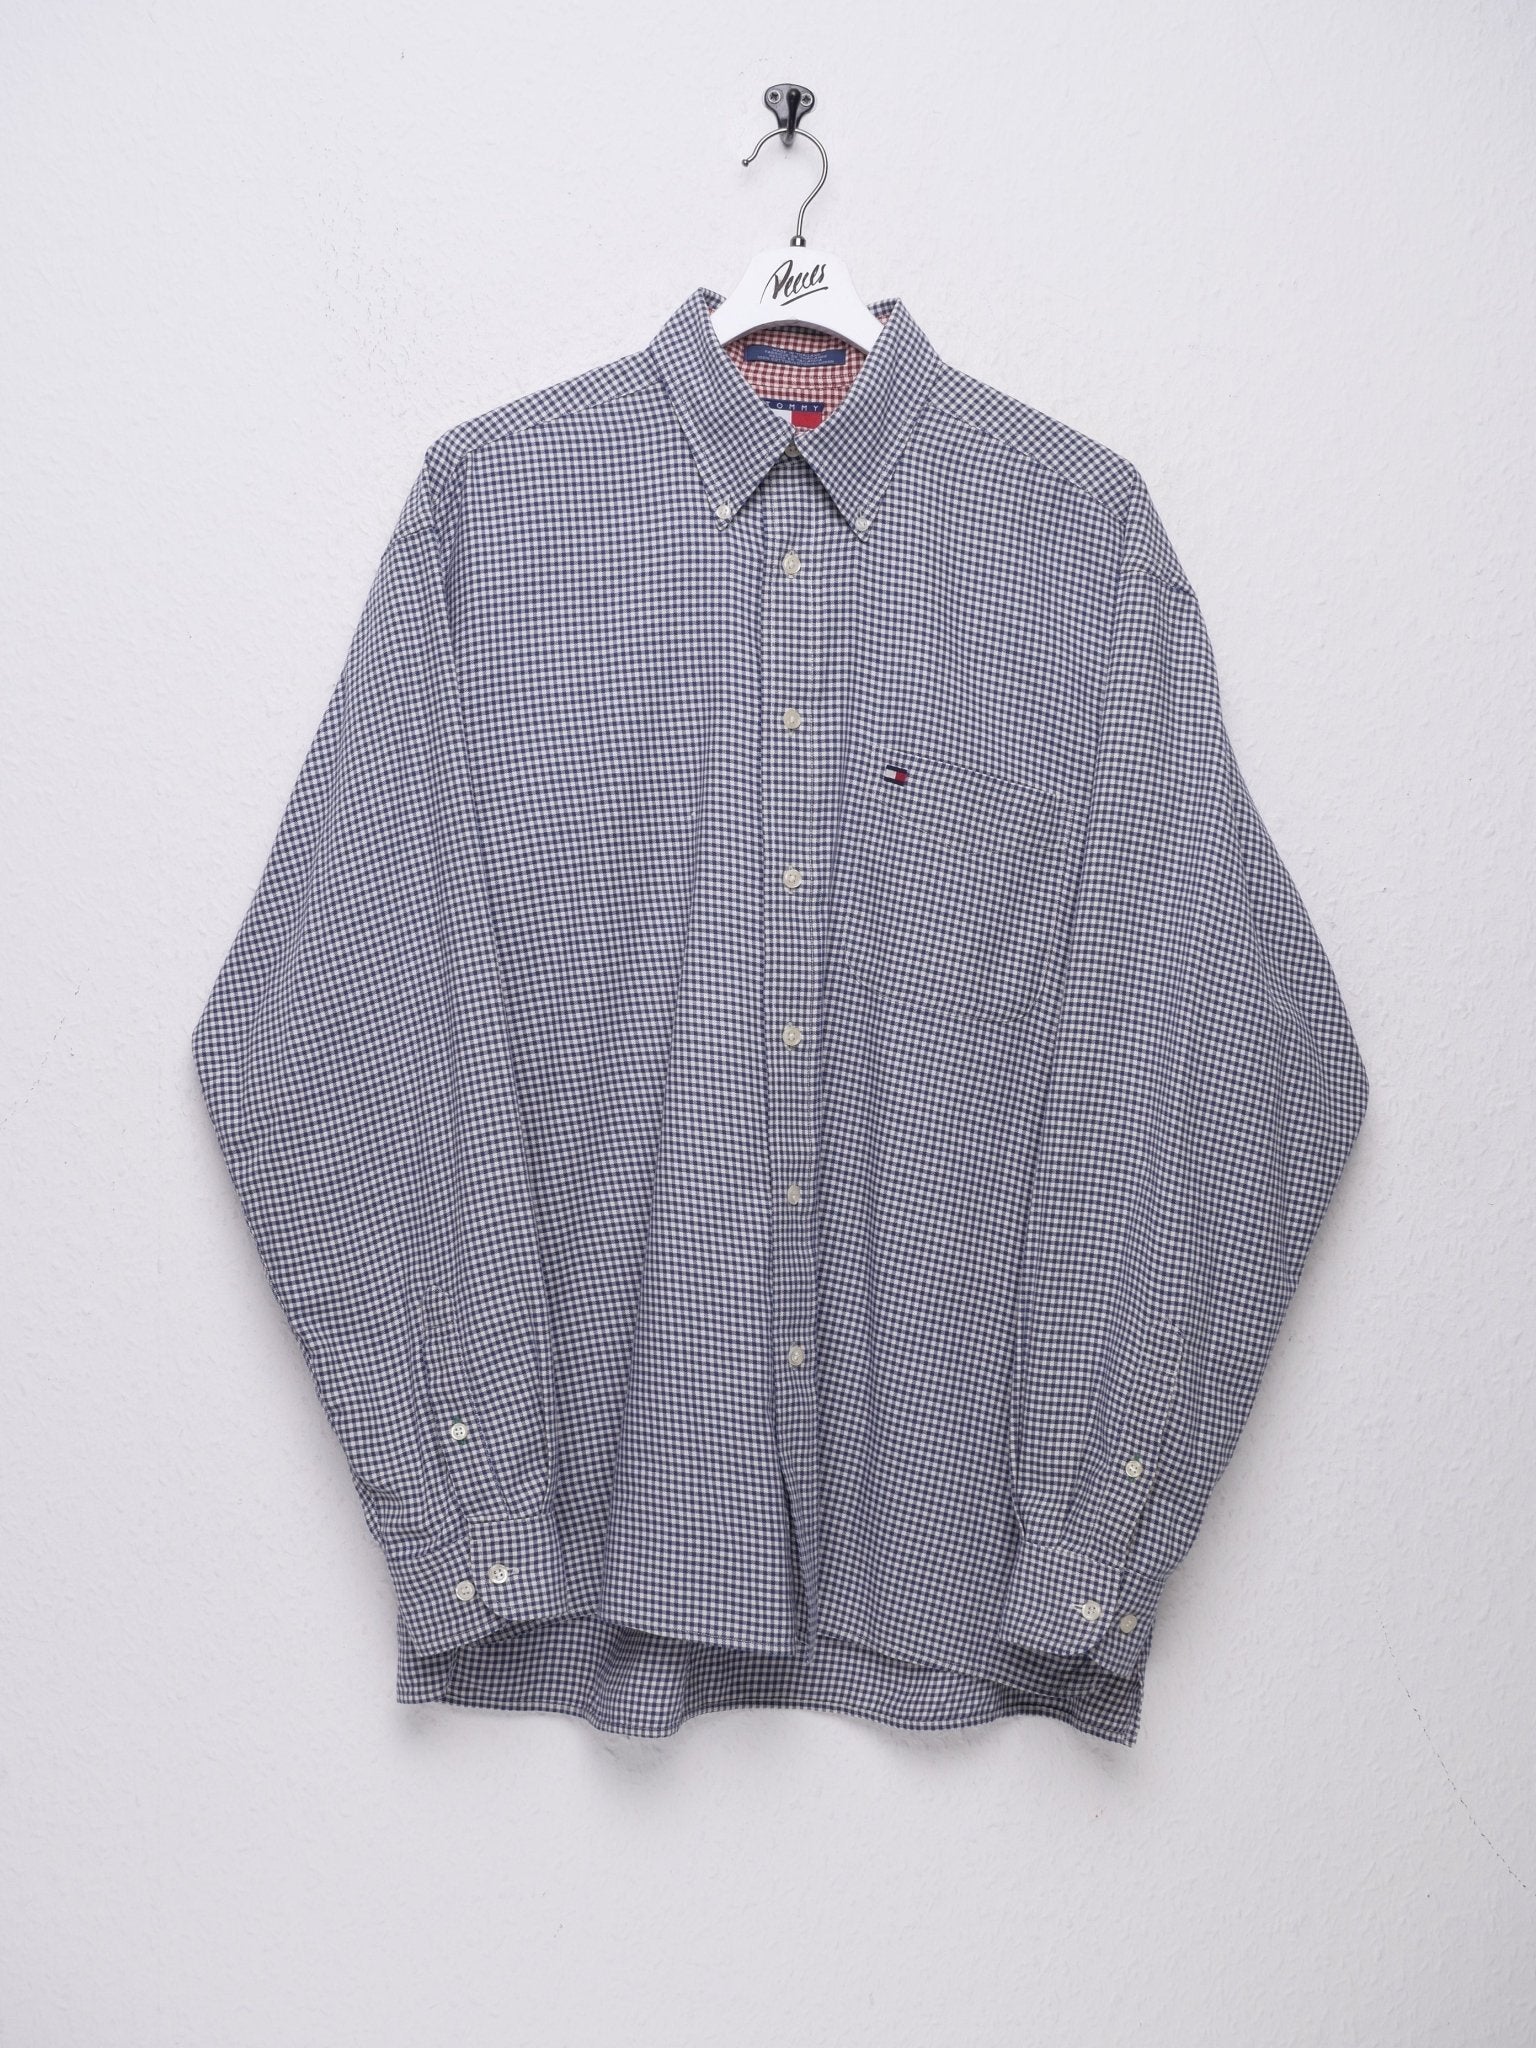 Tommy Hilfiger embroidered Logo checkered Button Down - Peeces